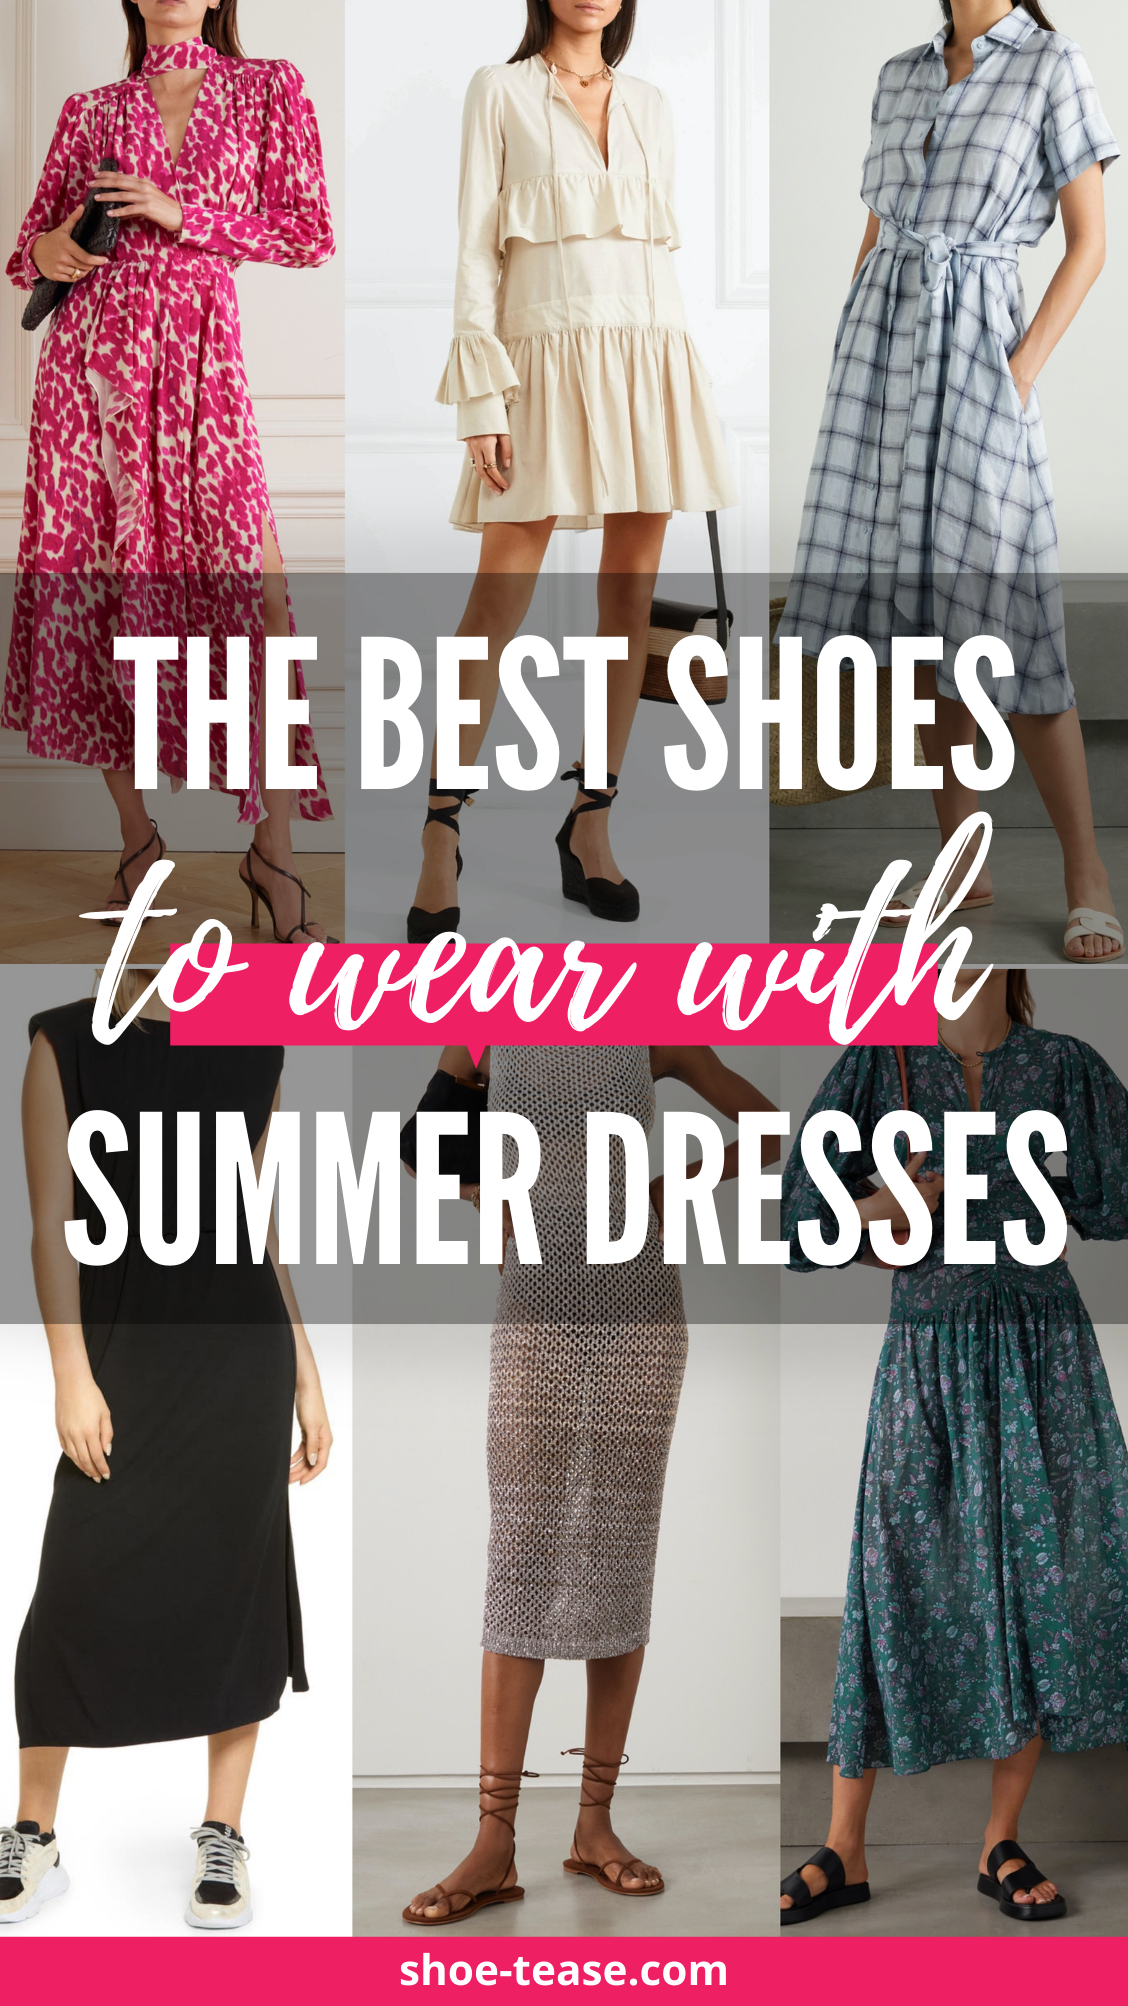 What Color Shoes To Wear With A Black Dress | Jo-Lynne Shane